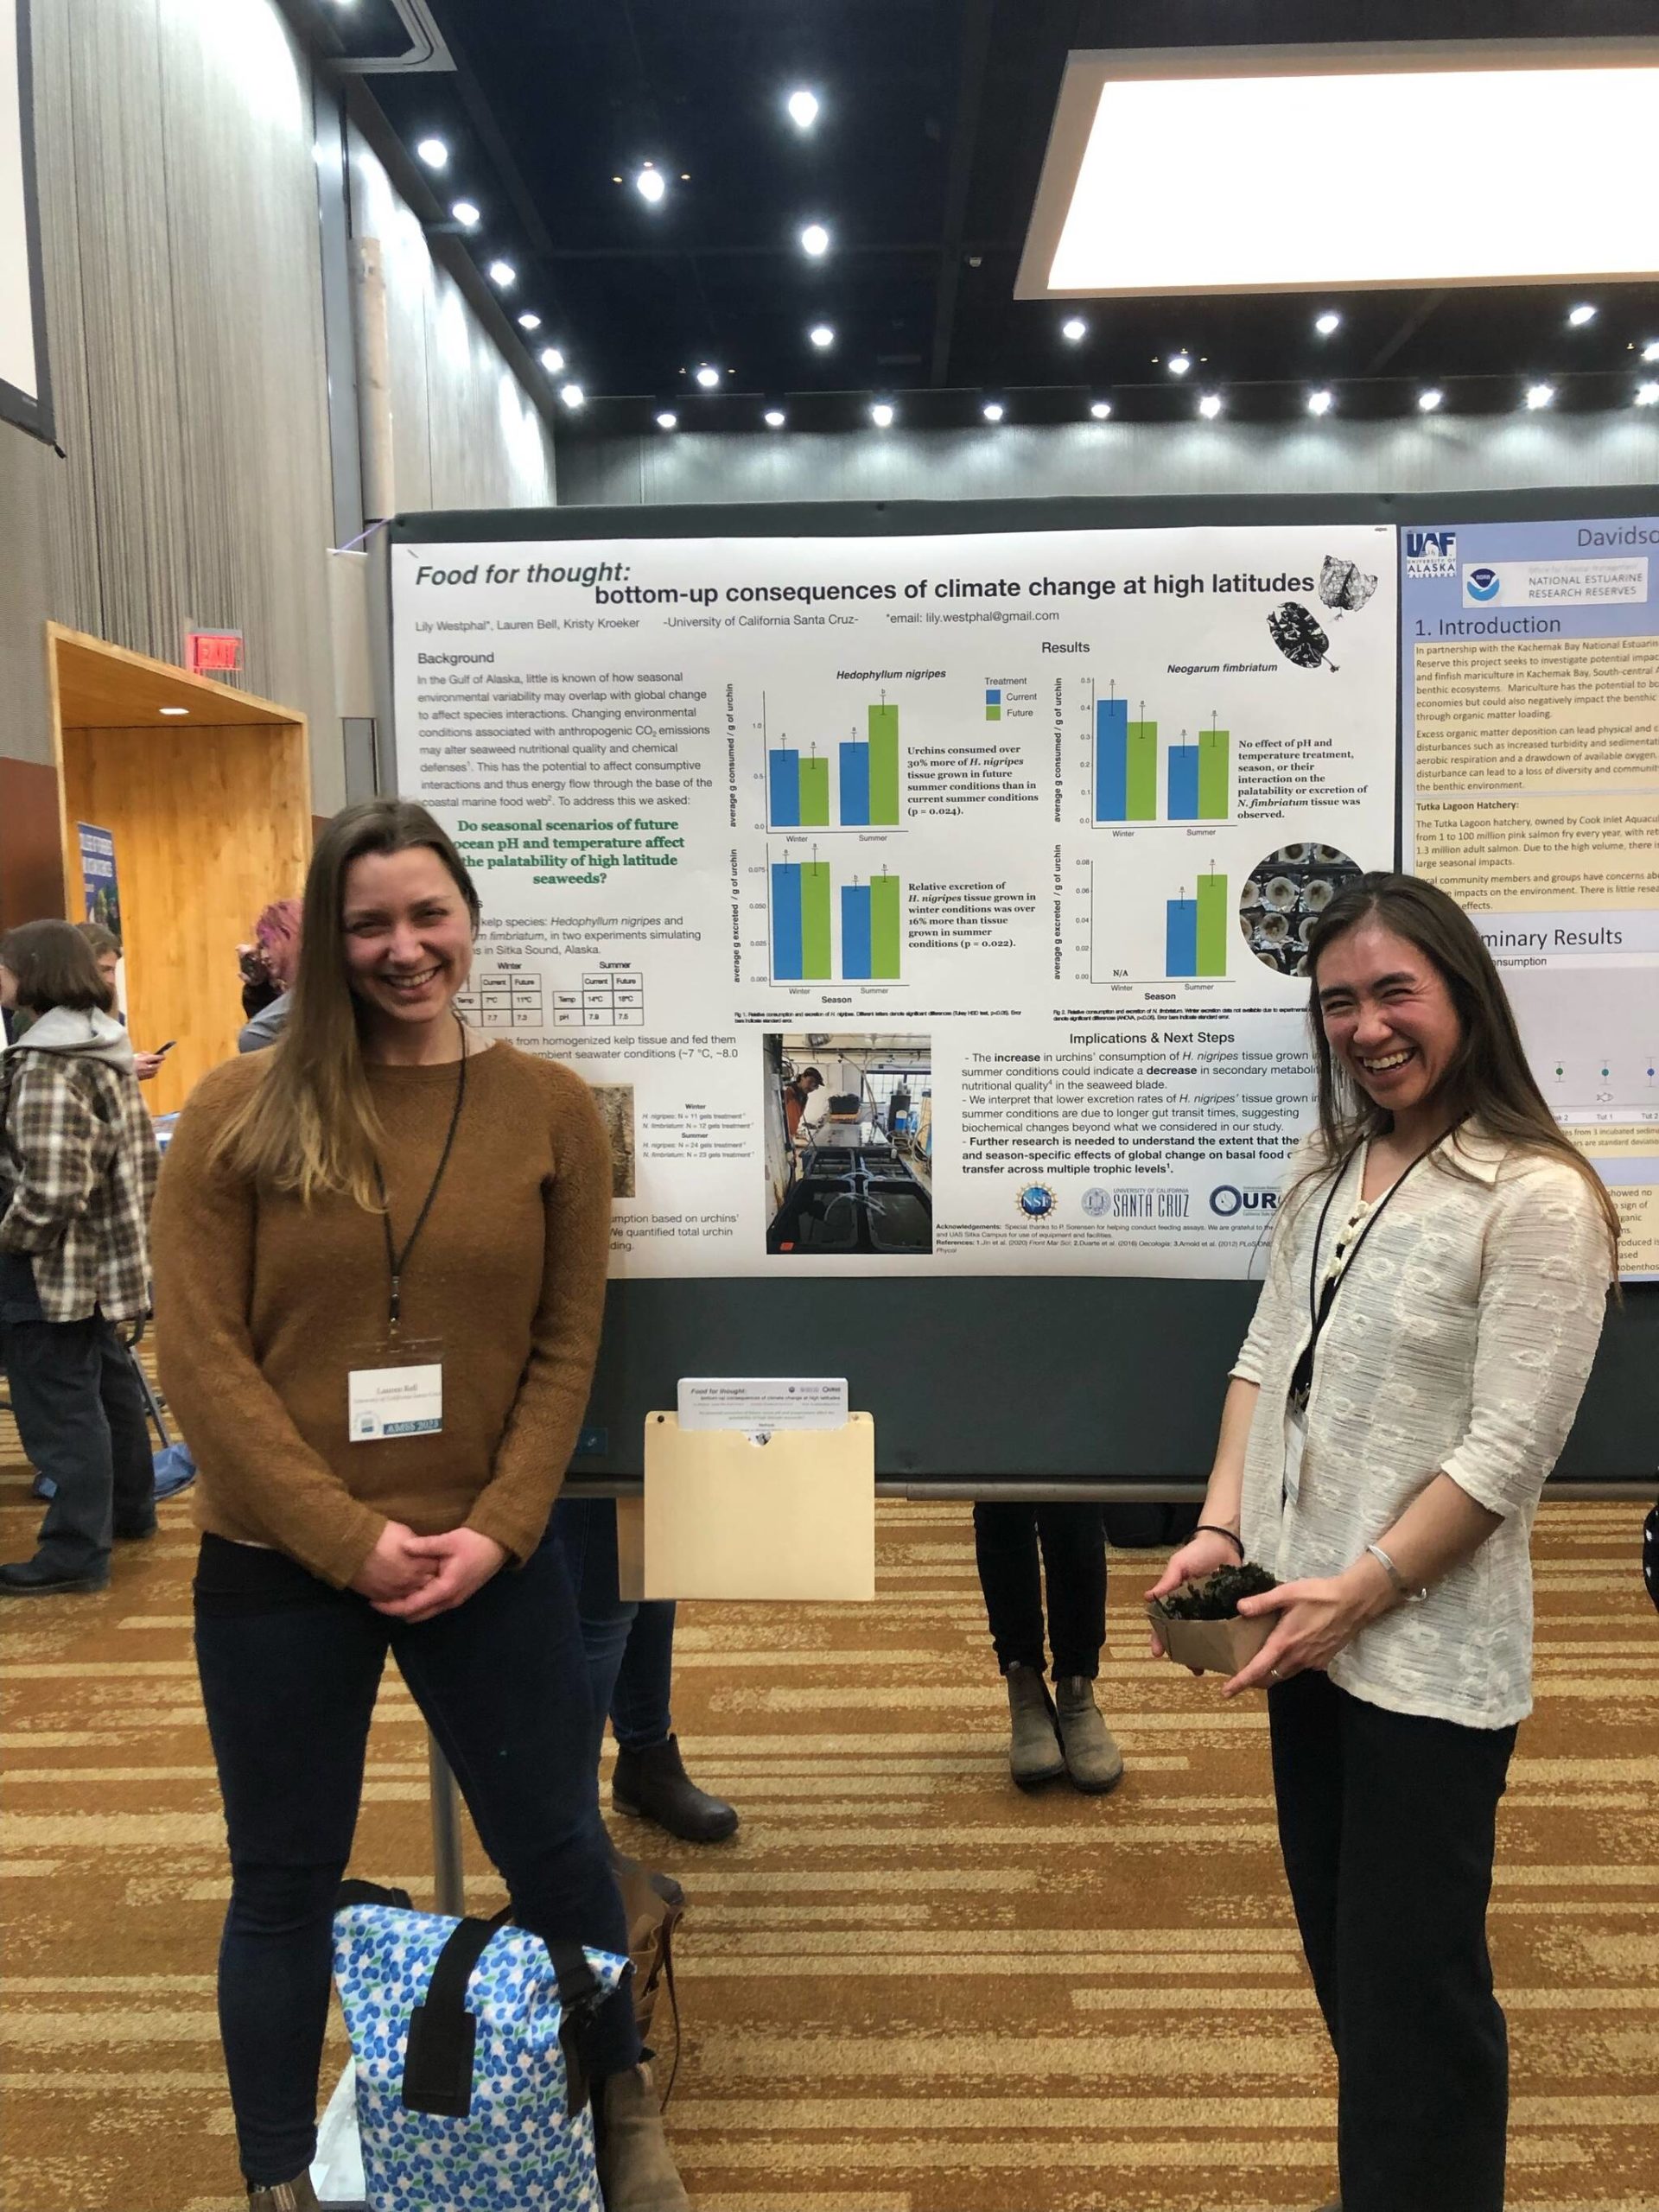 Lauren Bell and Lily Westphal at the AMCC poster session on Monday Jan. 23 at the Denai'na Center in Anchorage, Alaska. Photo contributed by Lily Westphal.